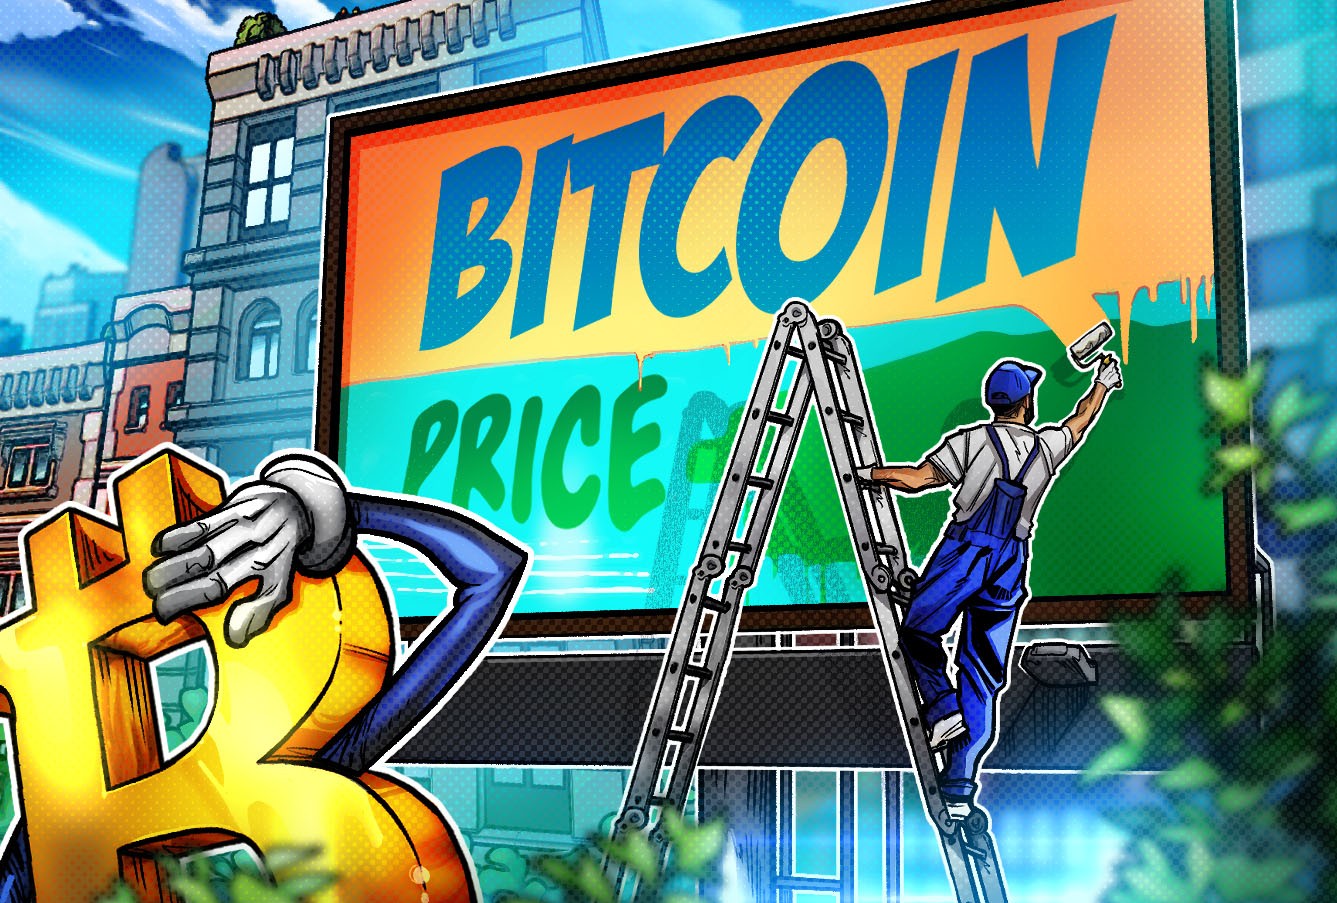 Bitcoin may hit new high if US employment, inflation slows